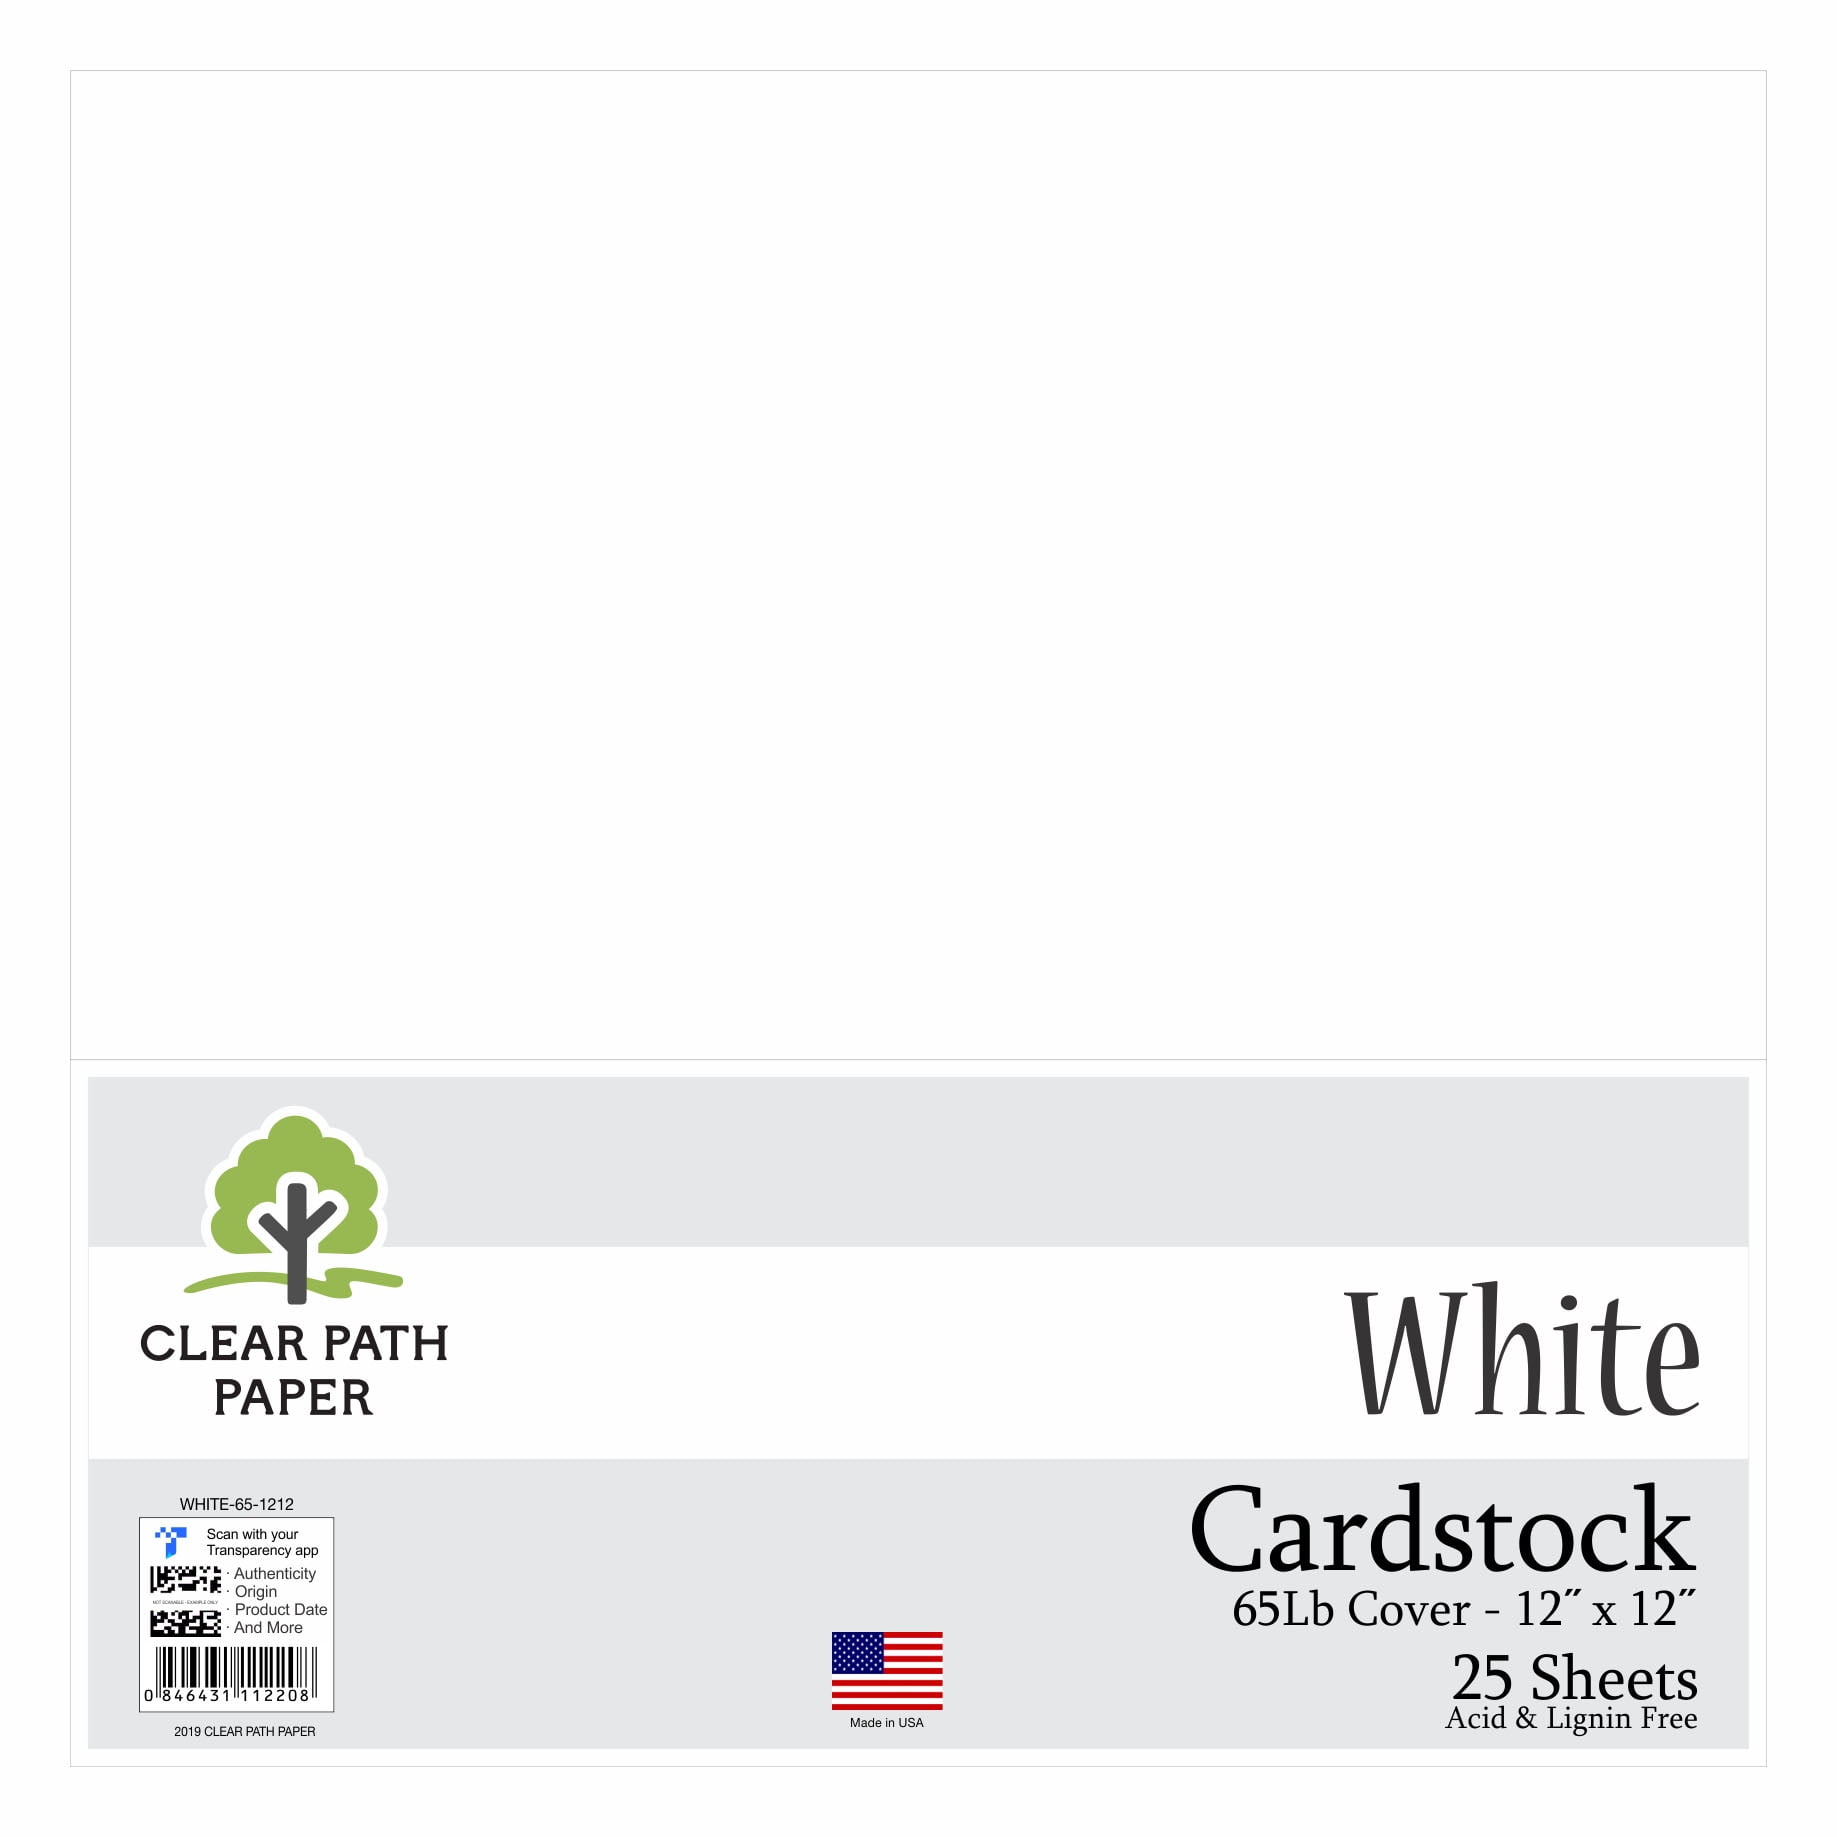 8.5 x 11 inch Formerly Red Hot 65Lb Cover 100 Sheets Clear Path Paper Apple Red Cardstock